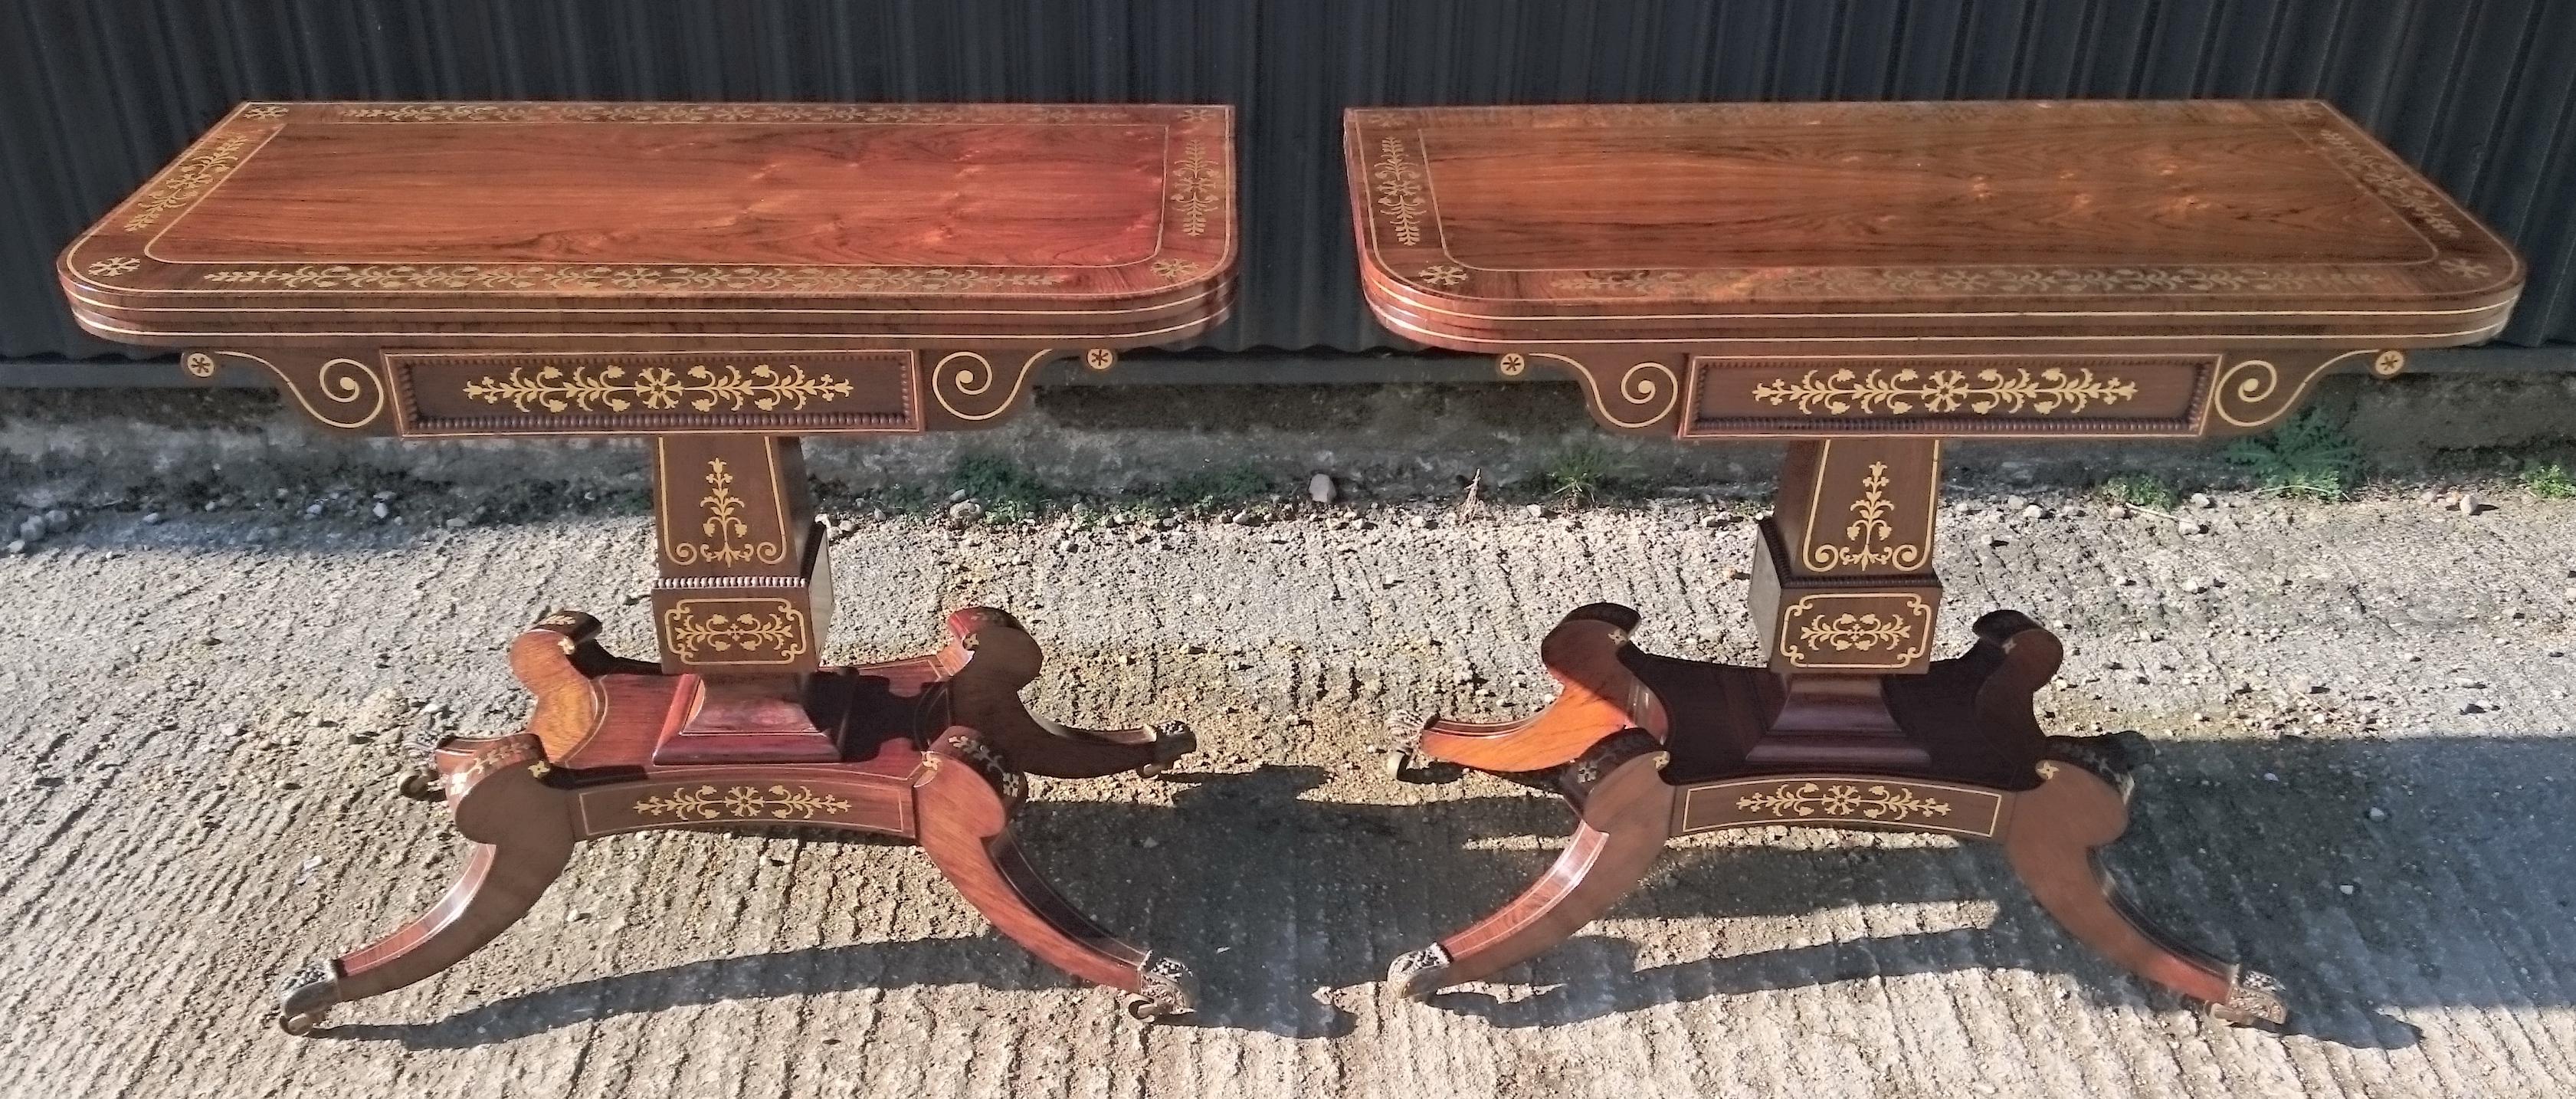 19th Century Pair of Antique Regency Card Tables